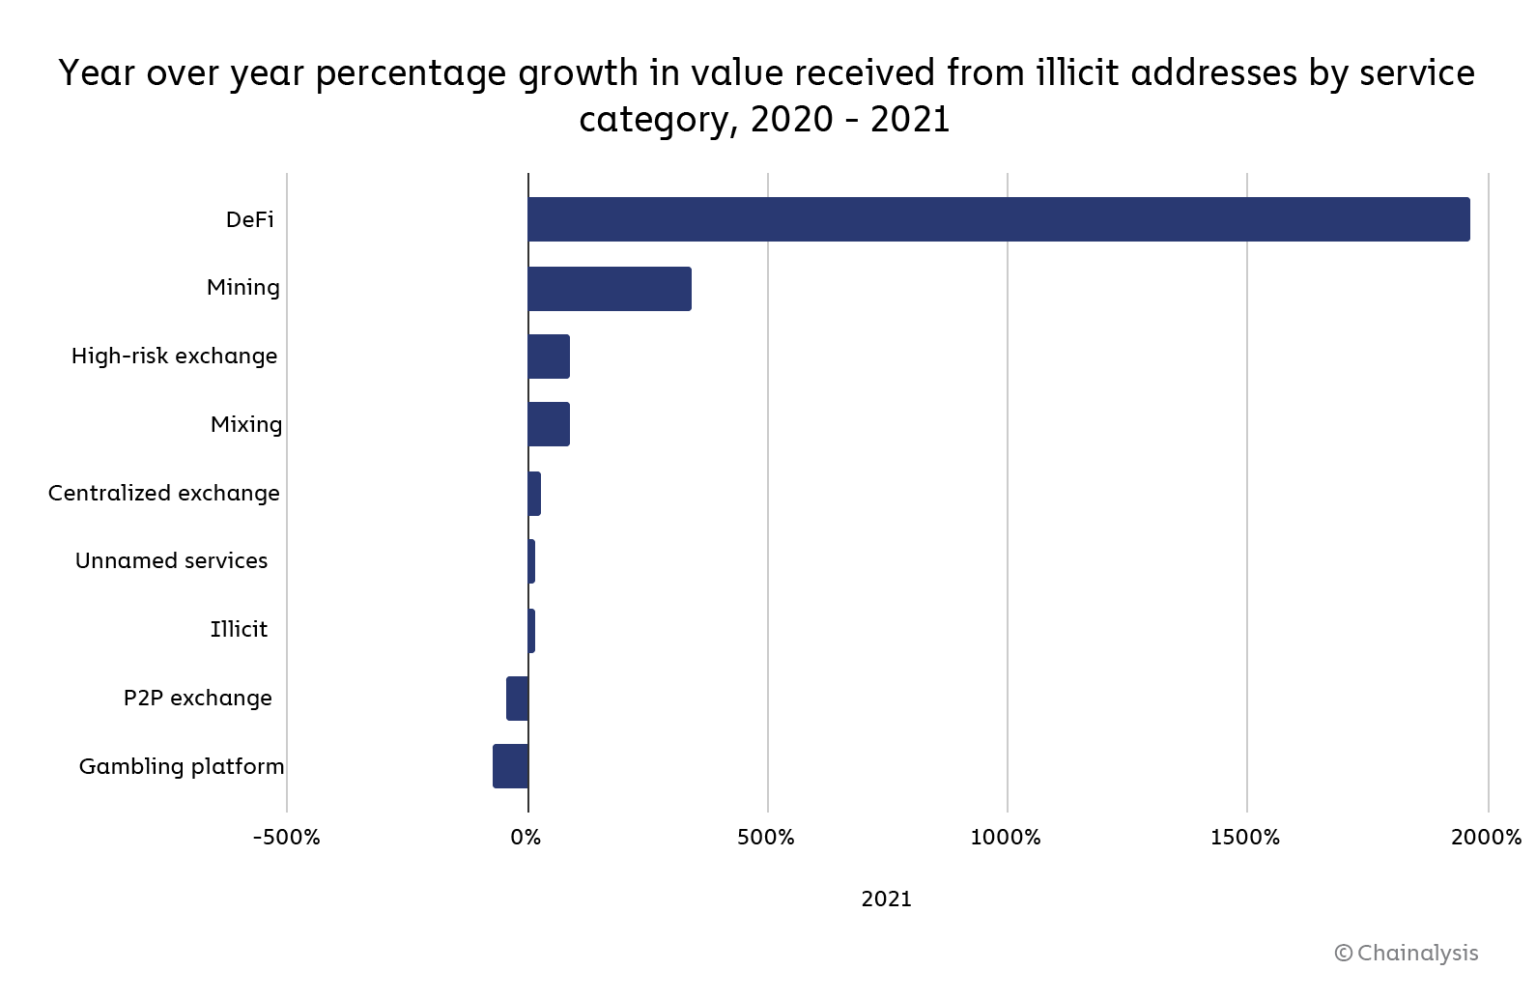 Percentage growth in value received from illicit addresses in 2021